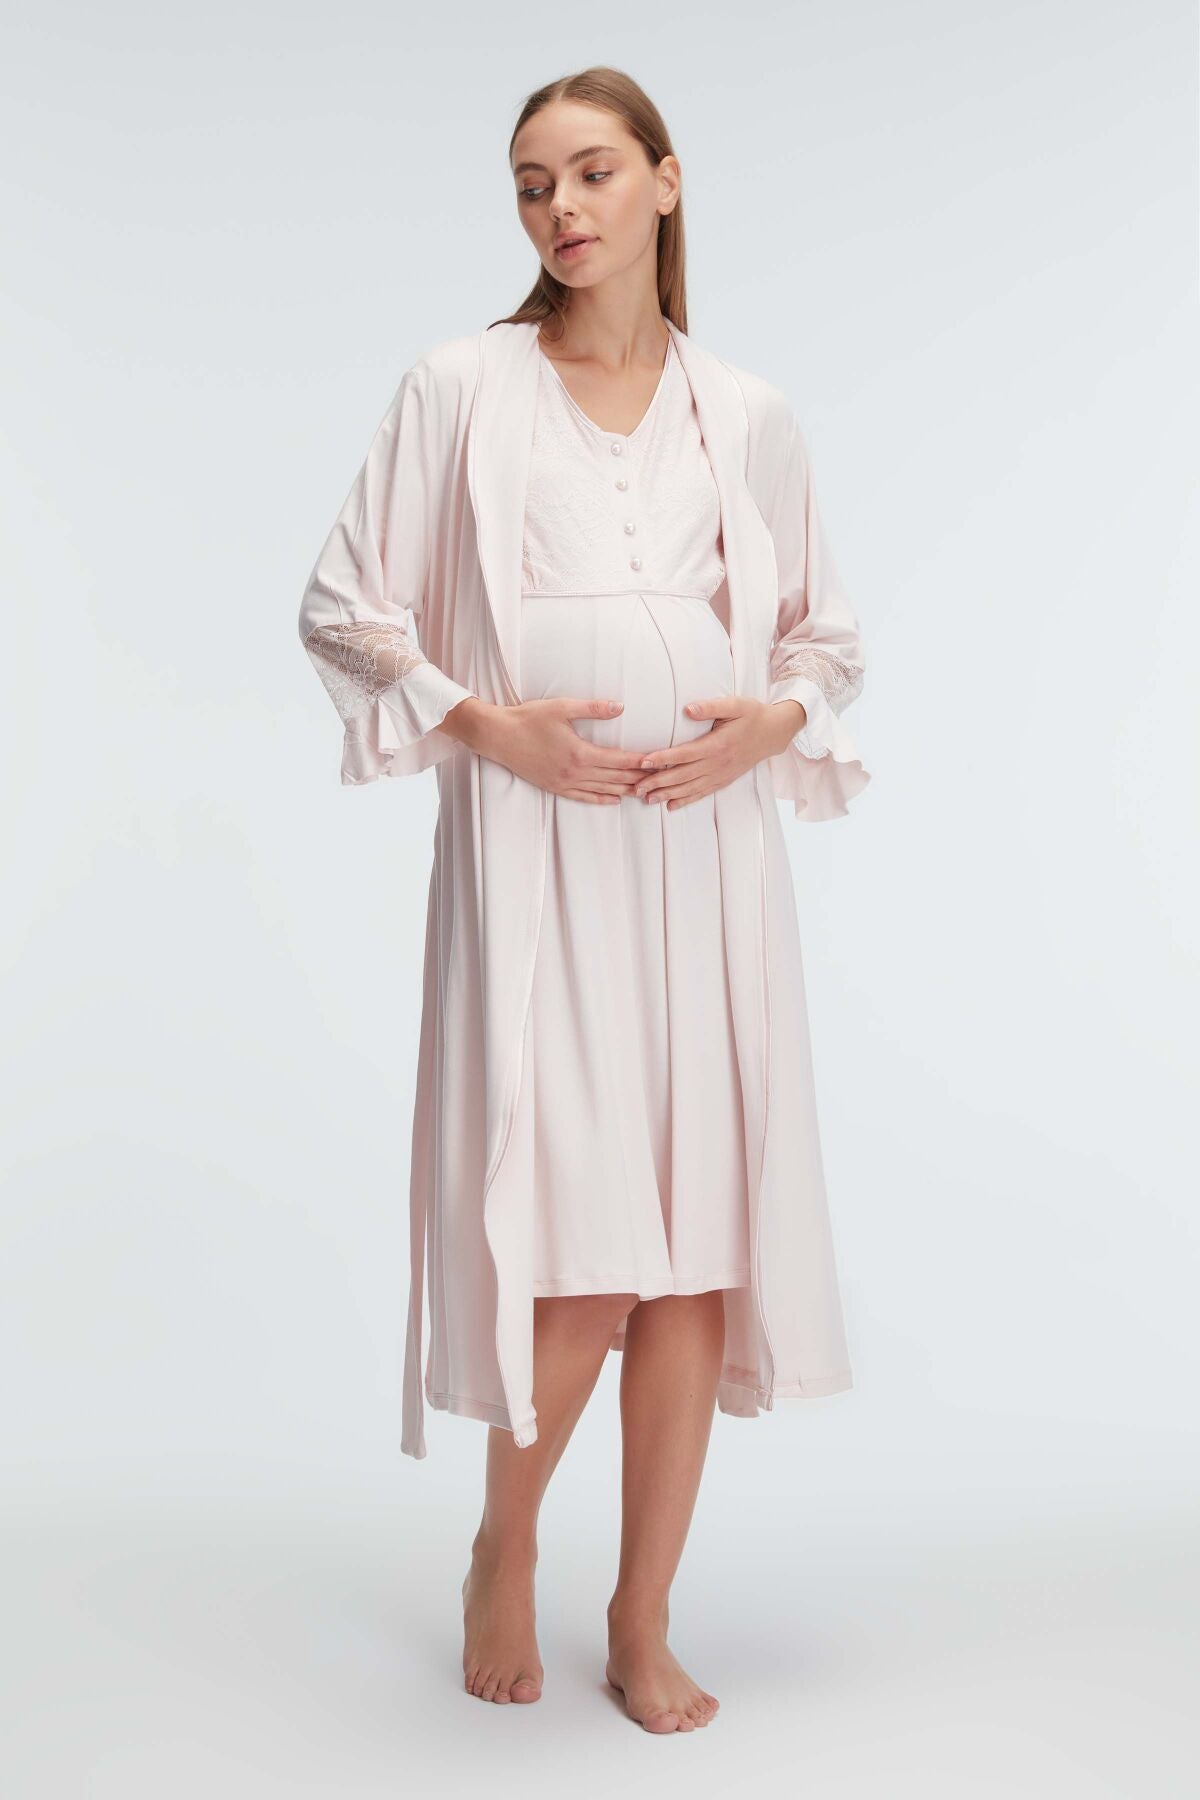 Shopymommy 11313 Lace Sleeve Maternity & Nursing Nightgown With Robe Ecru